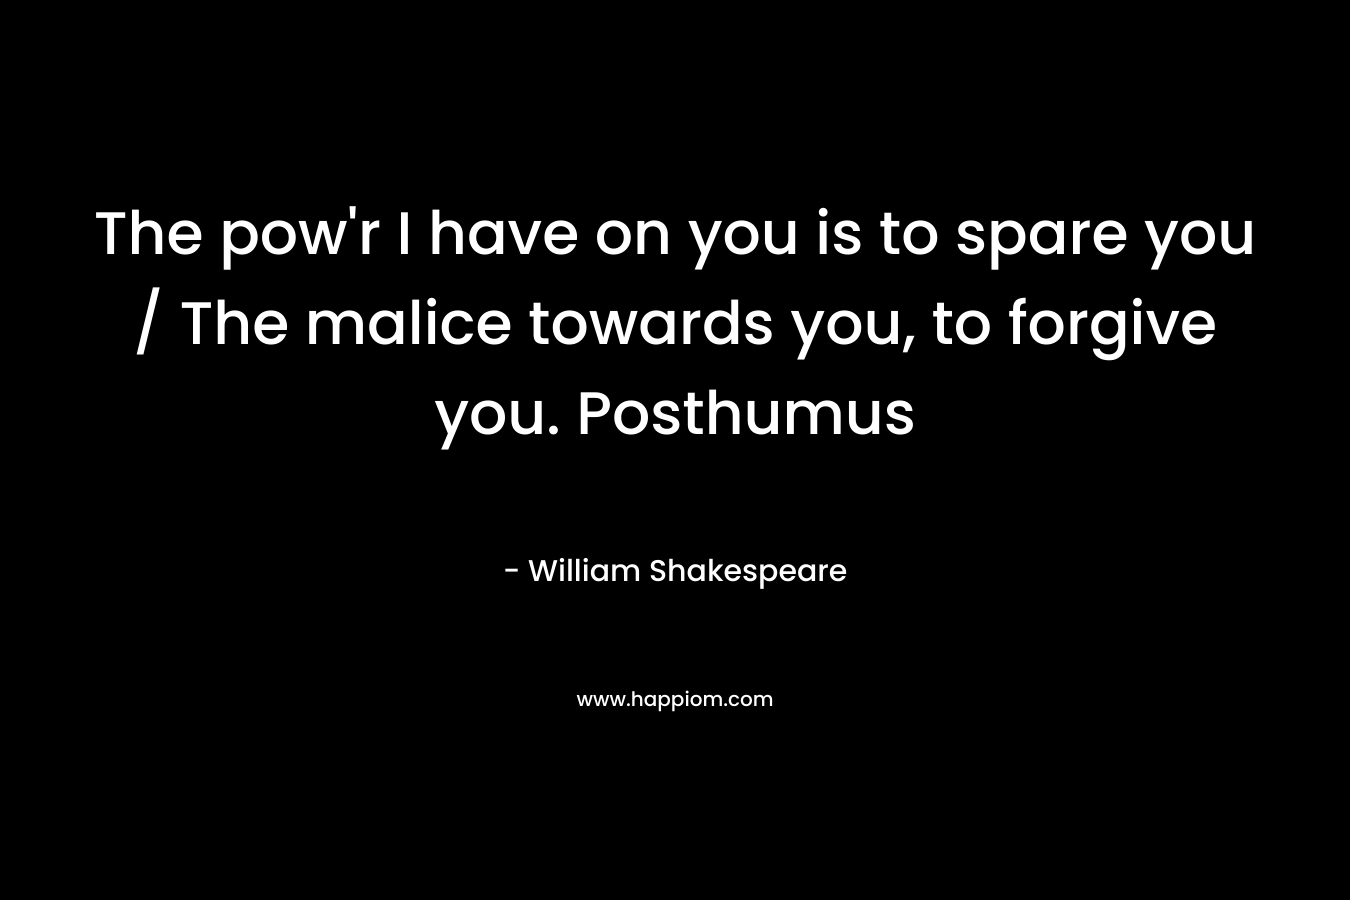 The pow’r I have on you is to spare you / The malice towards you, to forgive you. Posthumus – William Shakespeare